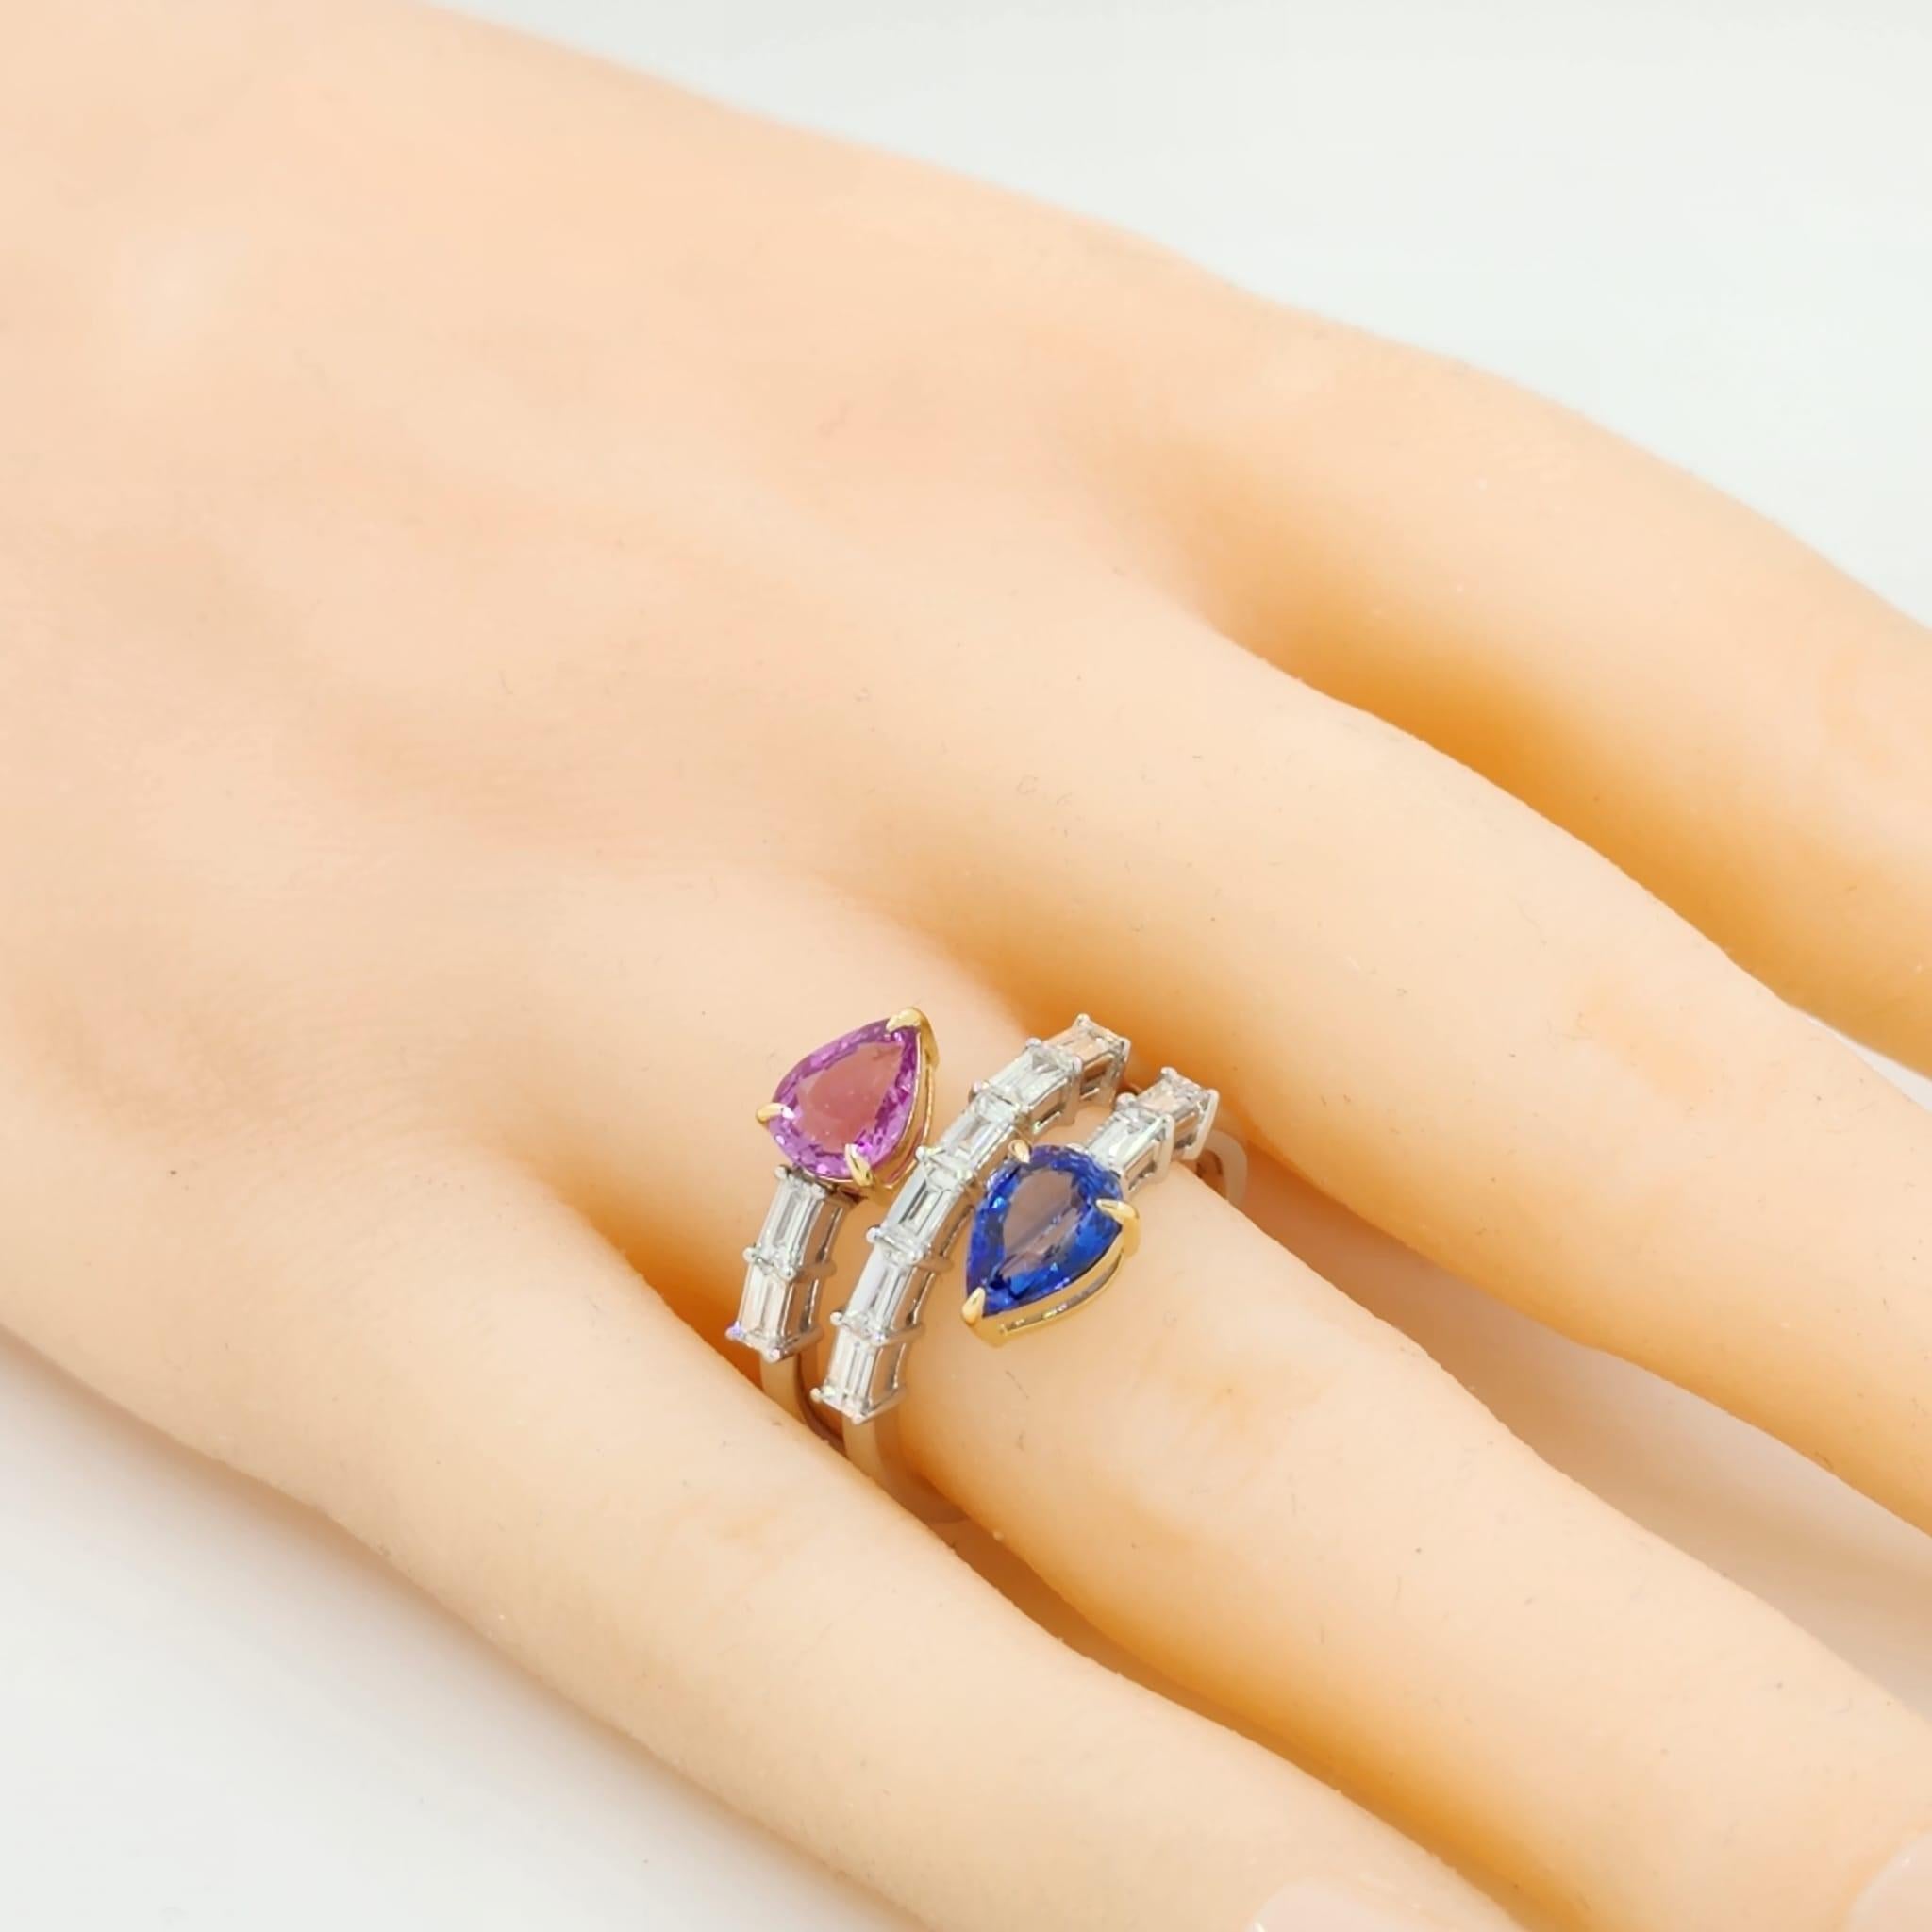 Women's Pear Shape Blue and Pink Sapphire Diamond Ring in 18 Karat Yellow and White Gold